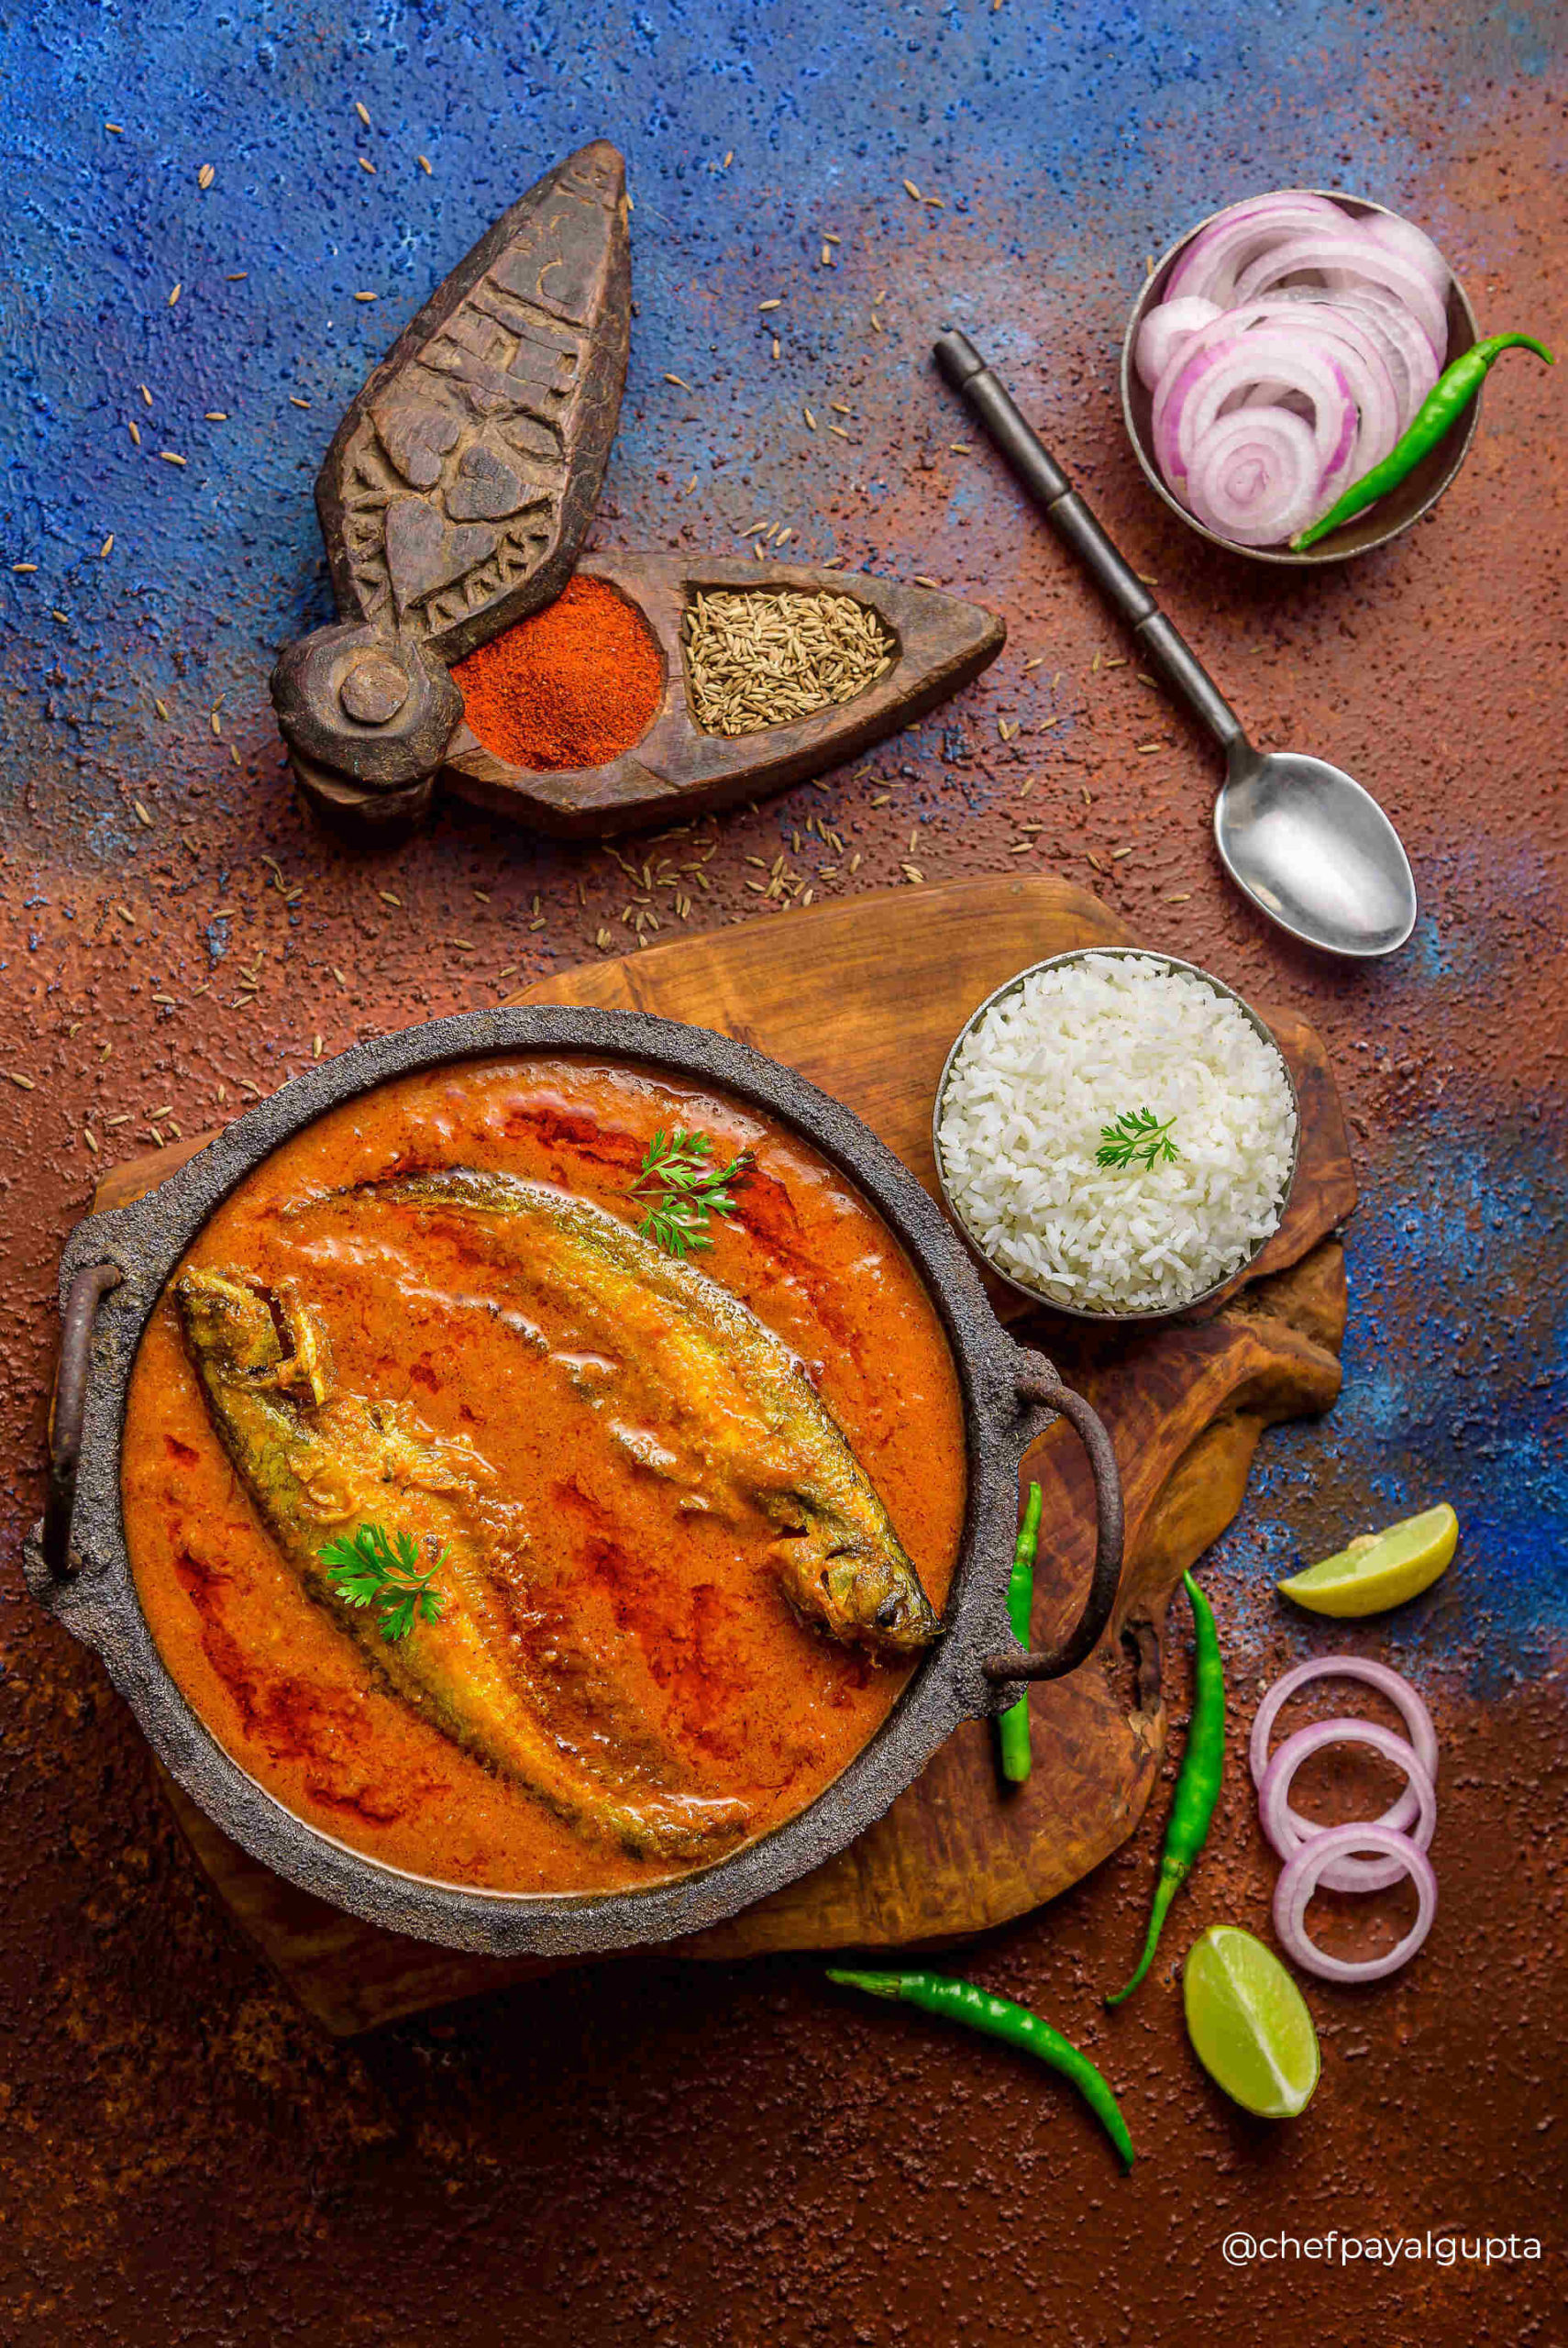 Pabda Mach is a famous fish curry recipe from Bengal which is cooked for everyday meals. It has a smooth texture and a delicious aroma to relish with rice.